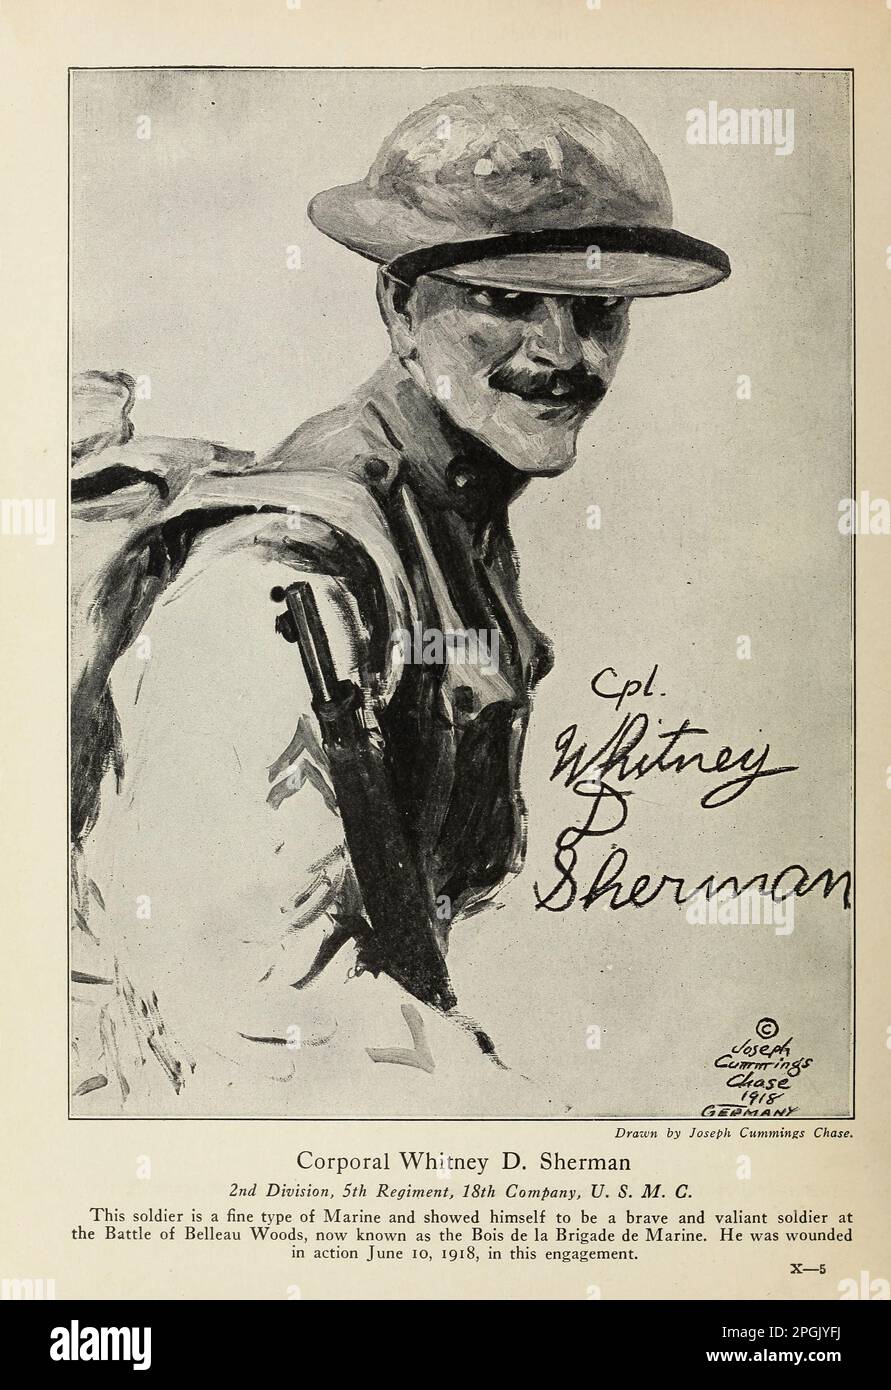 Corporal Whitney D. Sherman 2nd Division, 5th Regiment, 18th Company, U, S. M. C. This soldier is a fine type of Marine and showed himself to be a brave and valiant soldier at the Battle of Belleau Woods, now known as the Bois de la Brigade de Marine. He was wounded in action June lO, 1918, in this engagement. from the book ' Deeds of heroism and bravery : the book of heroes and personal daring ' by Elwyn Alfred Barron and Rupert Hughes,  Publication Date 1920 Publisher New York : Harper & Brothers Publishers Stock Photo